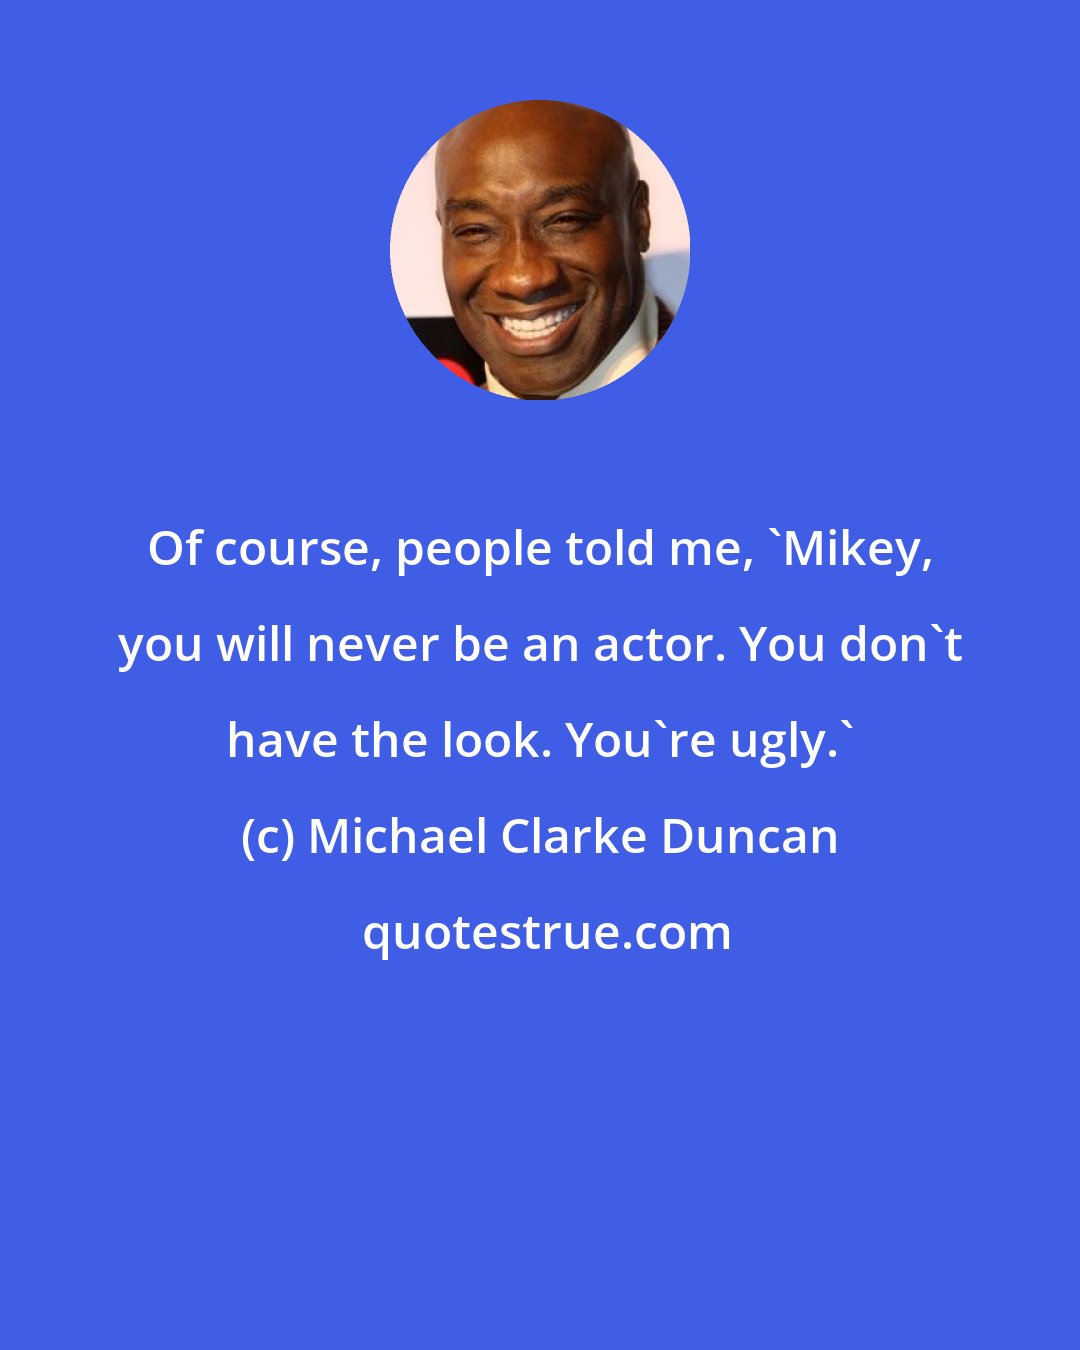 Michael Clarke Duncan: Of course, people told me, 'Mikey, you will never be an actor. You don't have the look. You're ugly.'